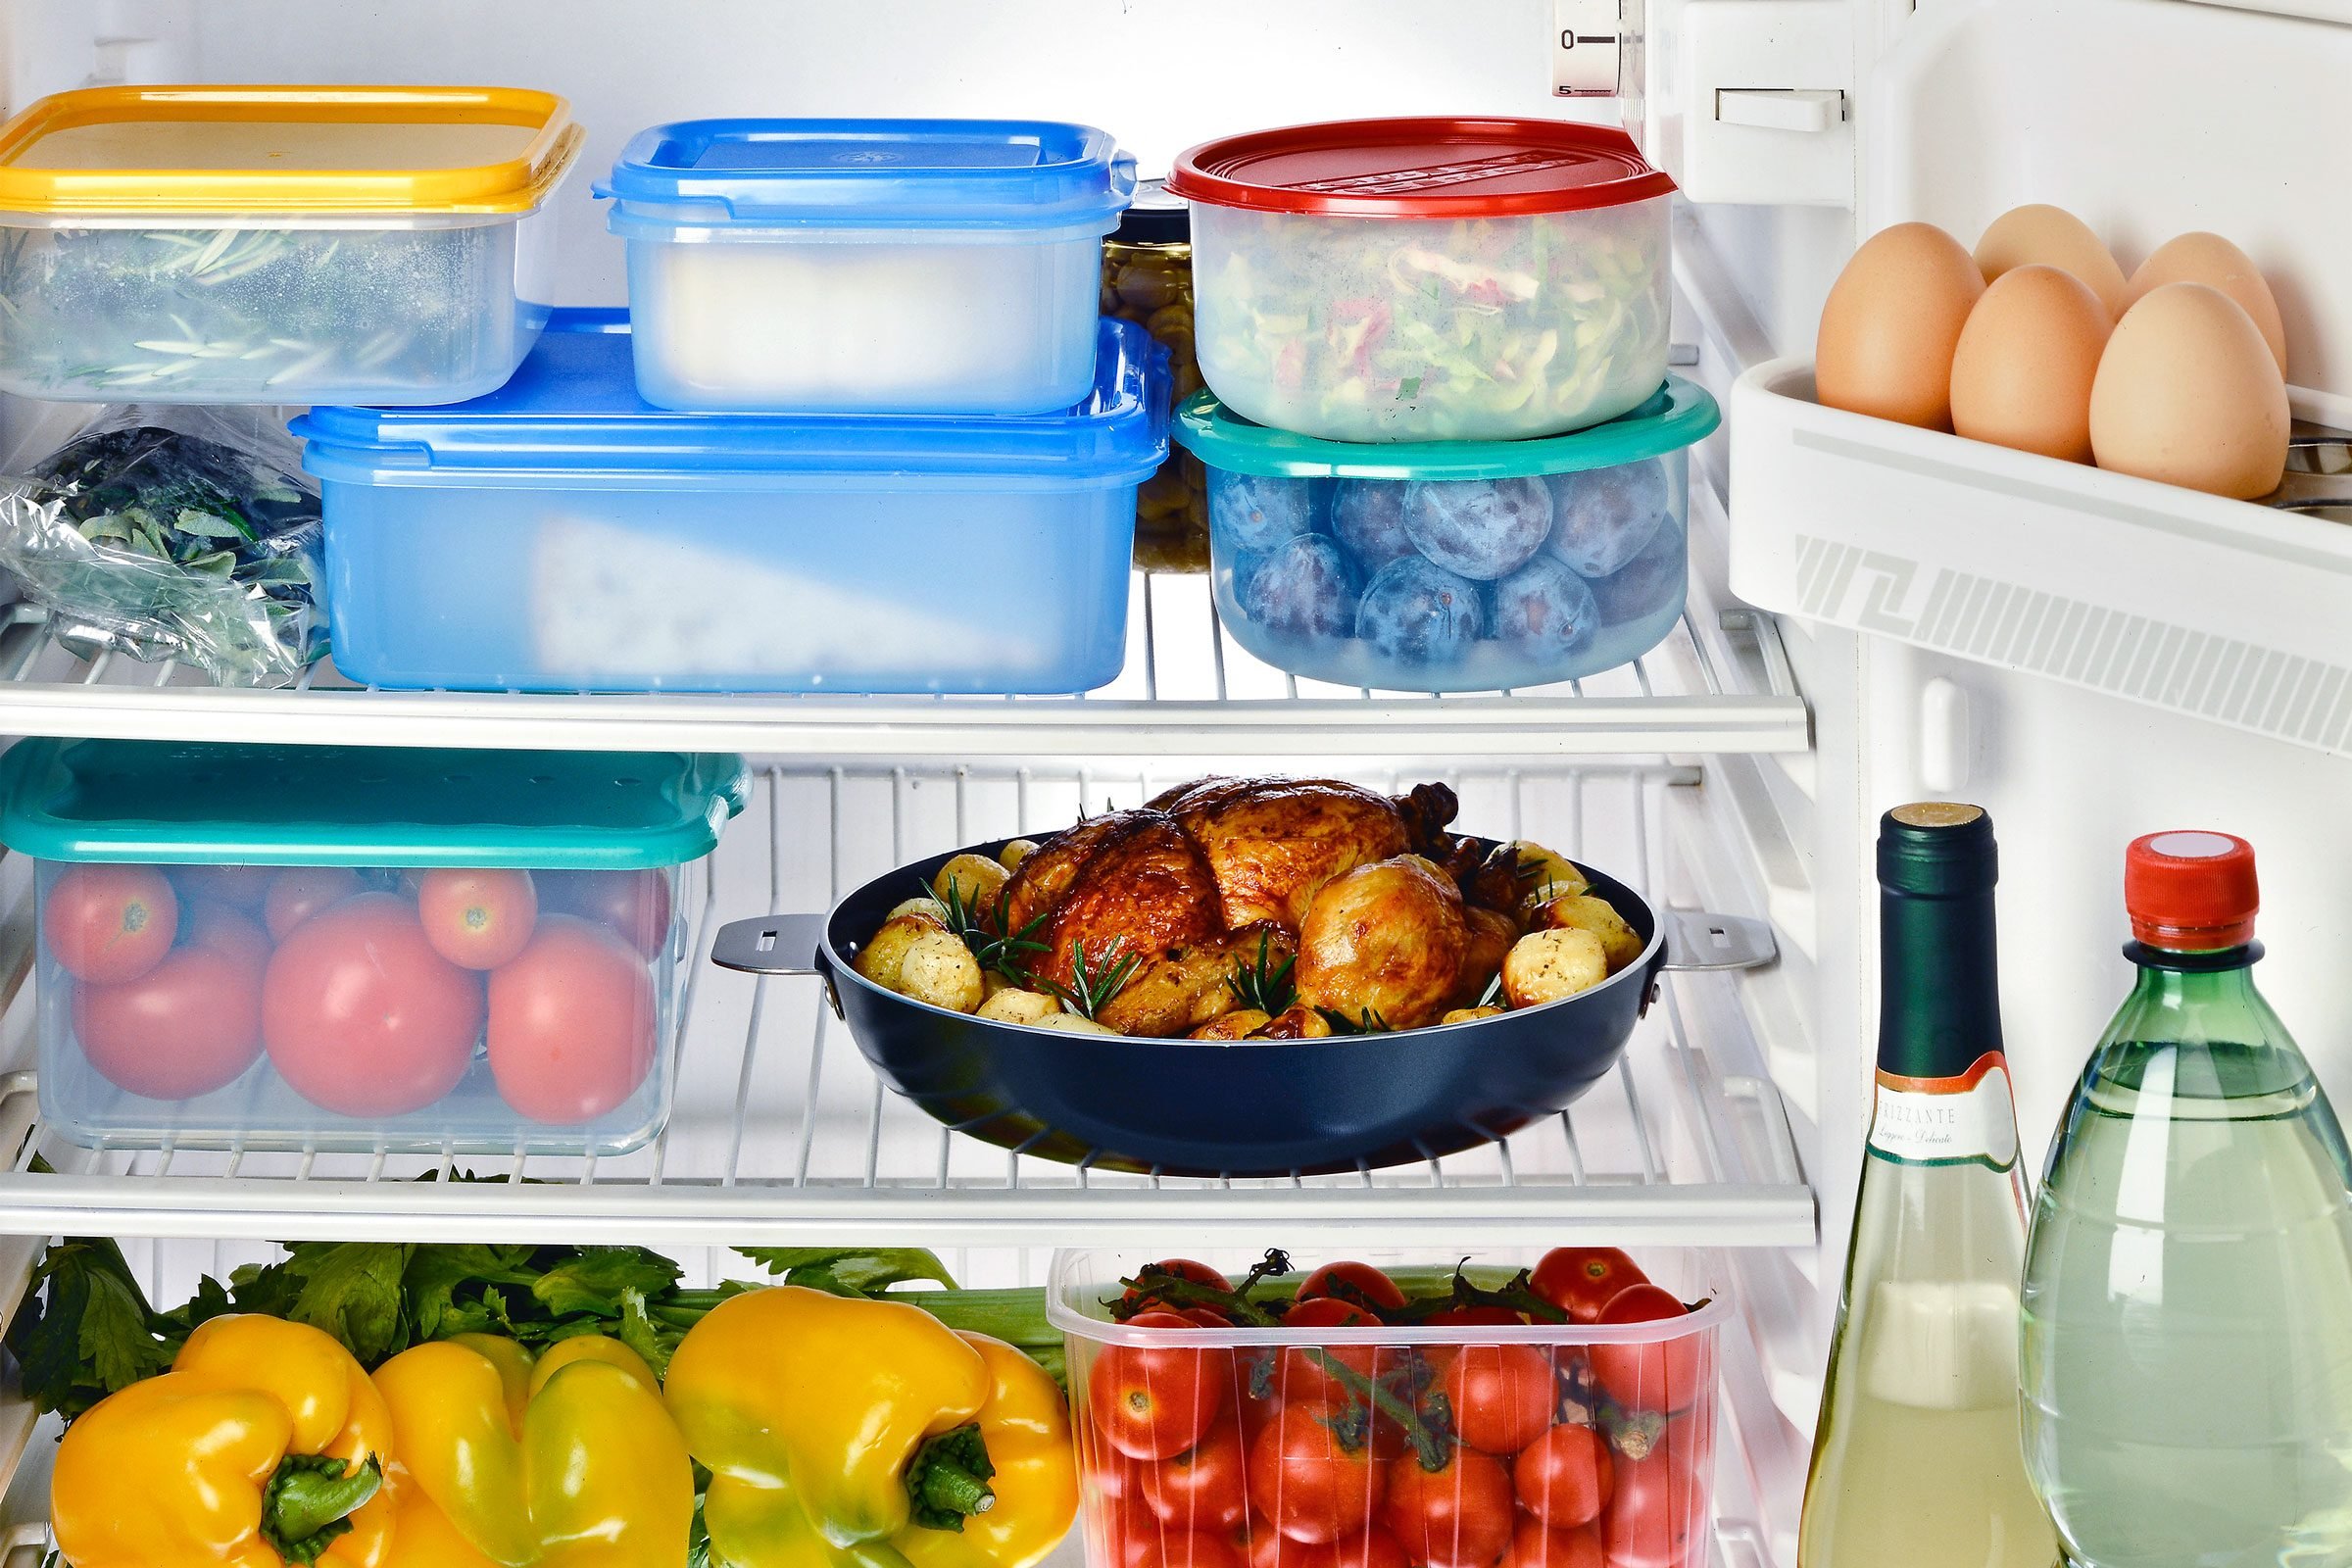 How Long Is Food Good In The Fridge? Meat, Fish, Eggs, Produce & More